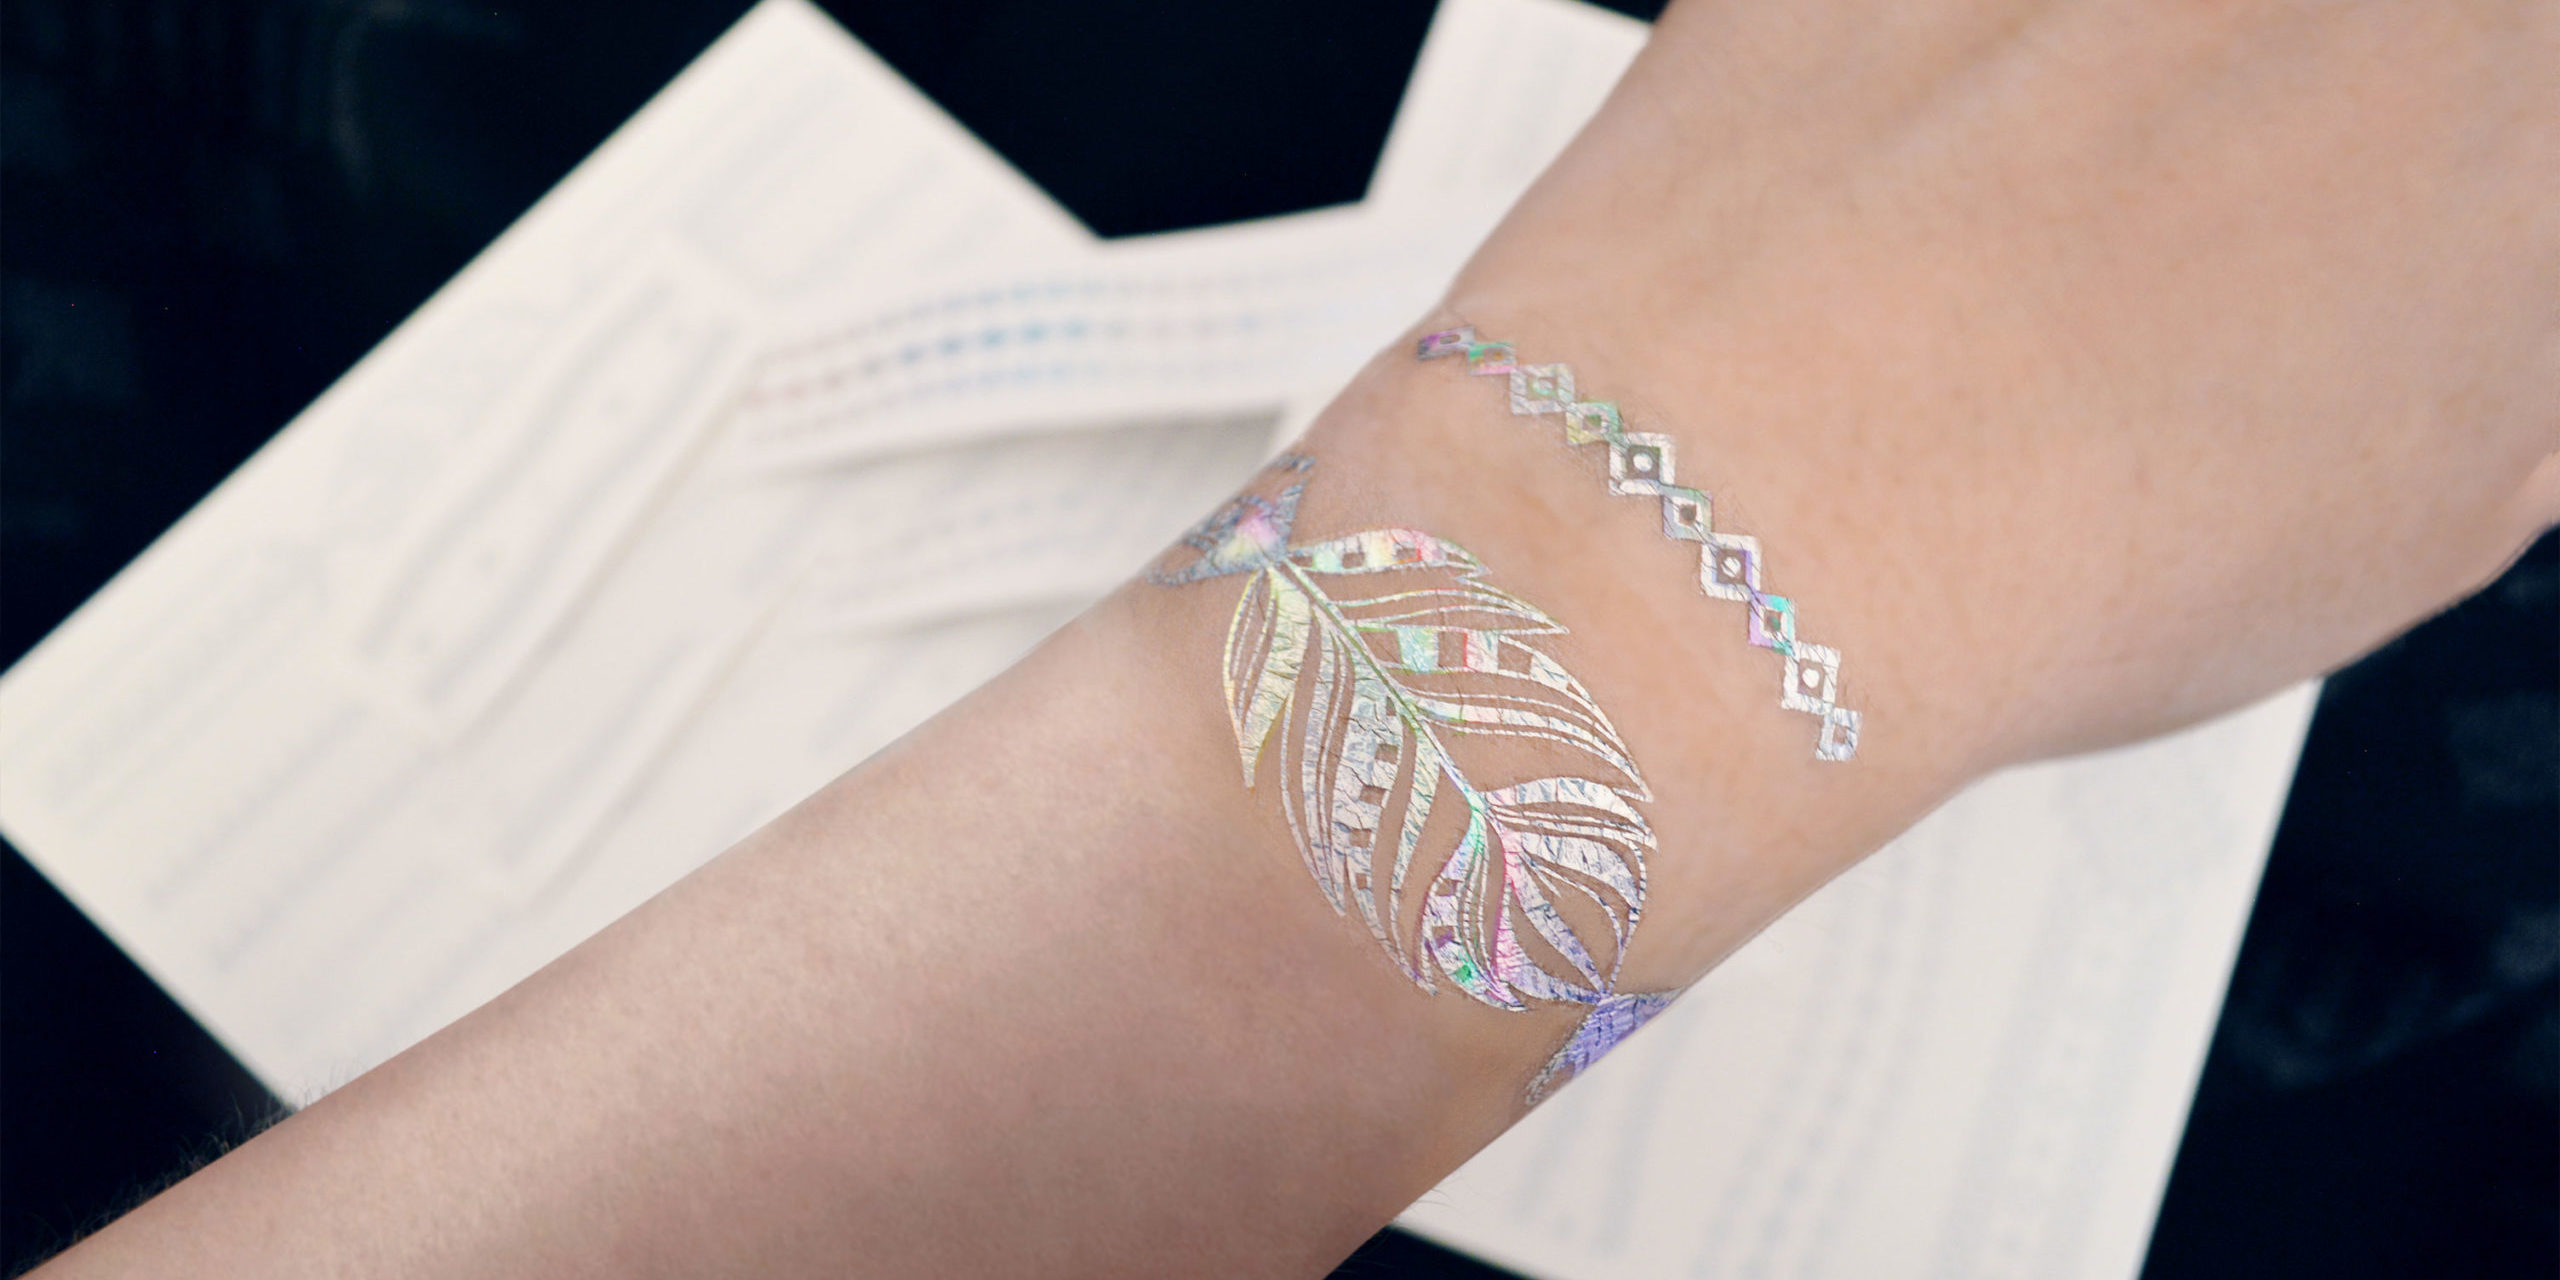 Talented Tattoo Artist Specializes in Holographic Sticker Tattoos